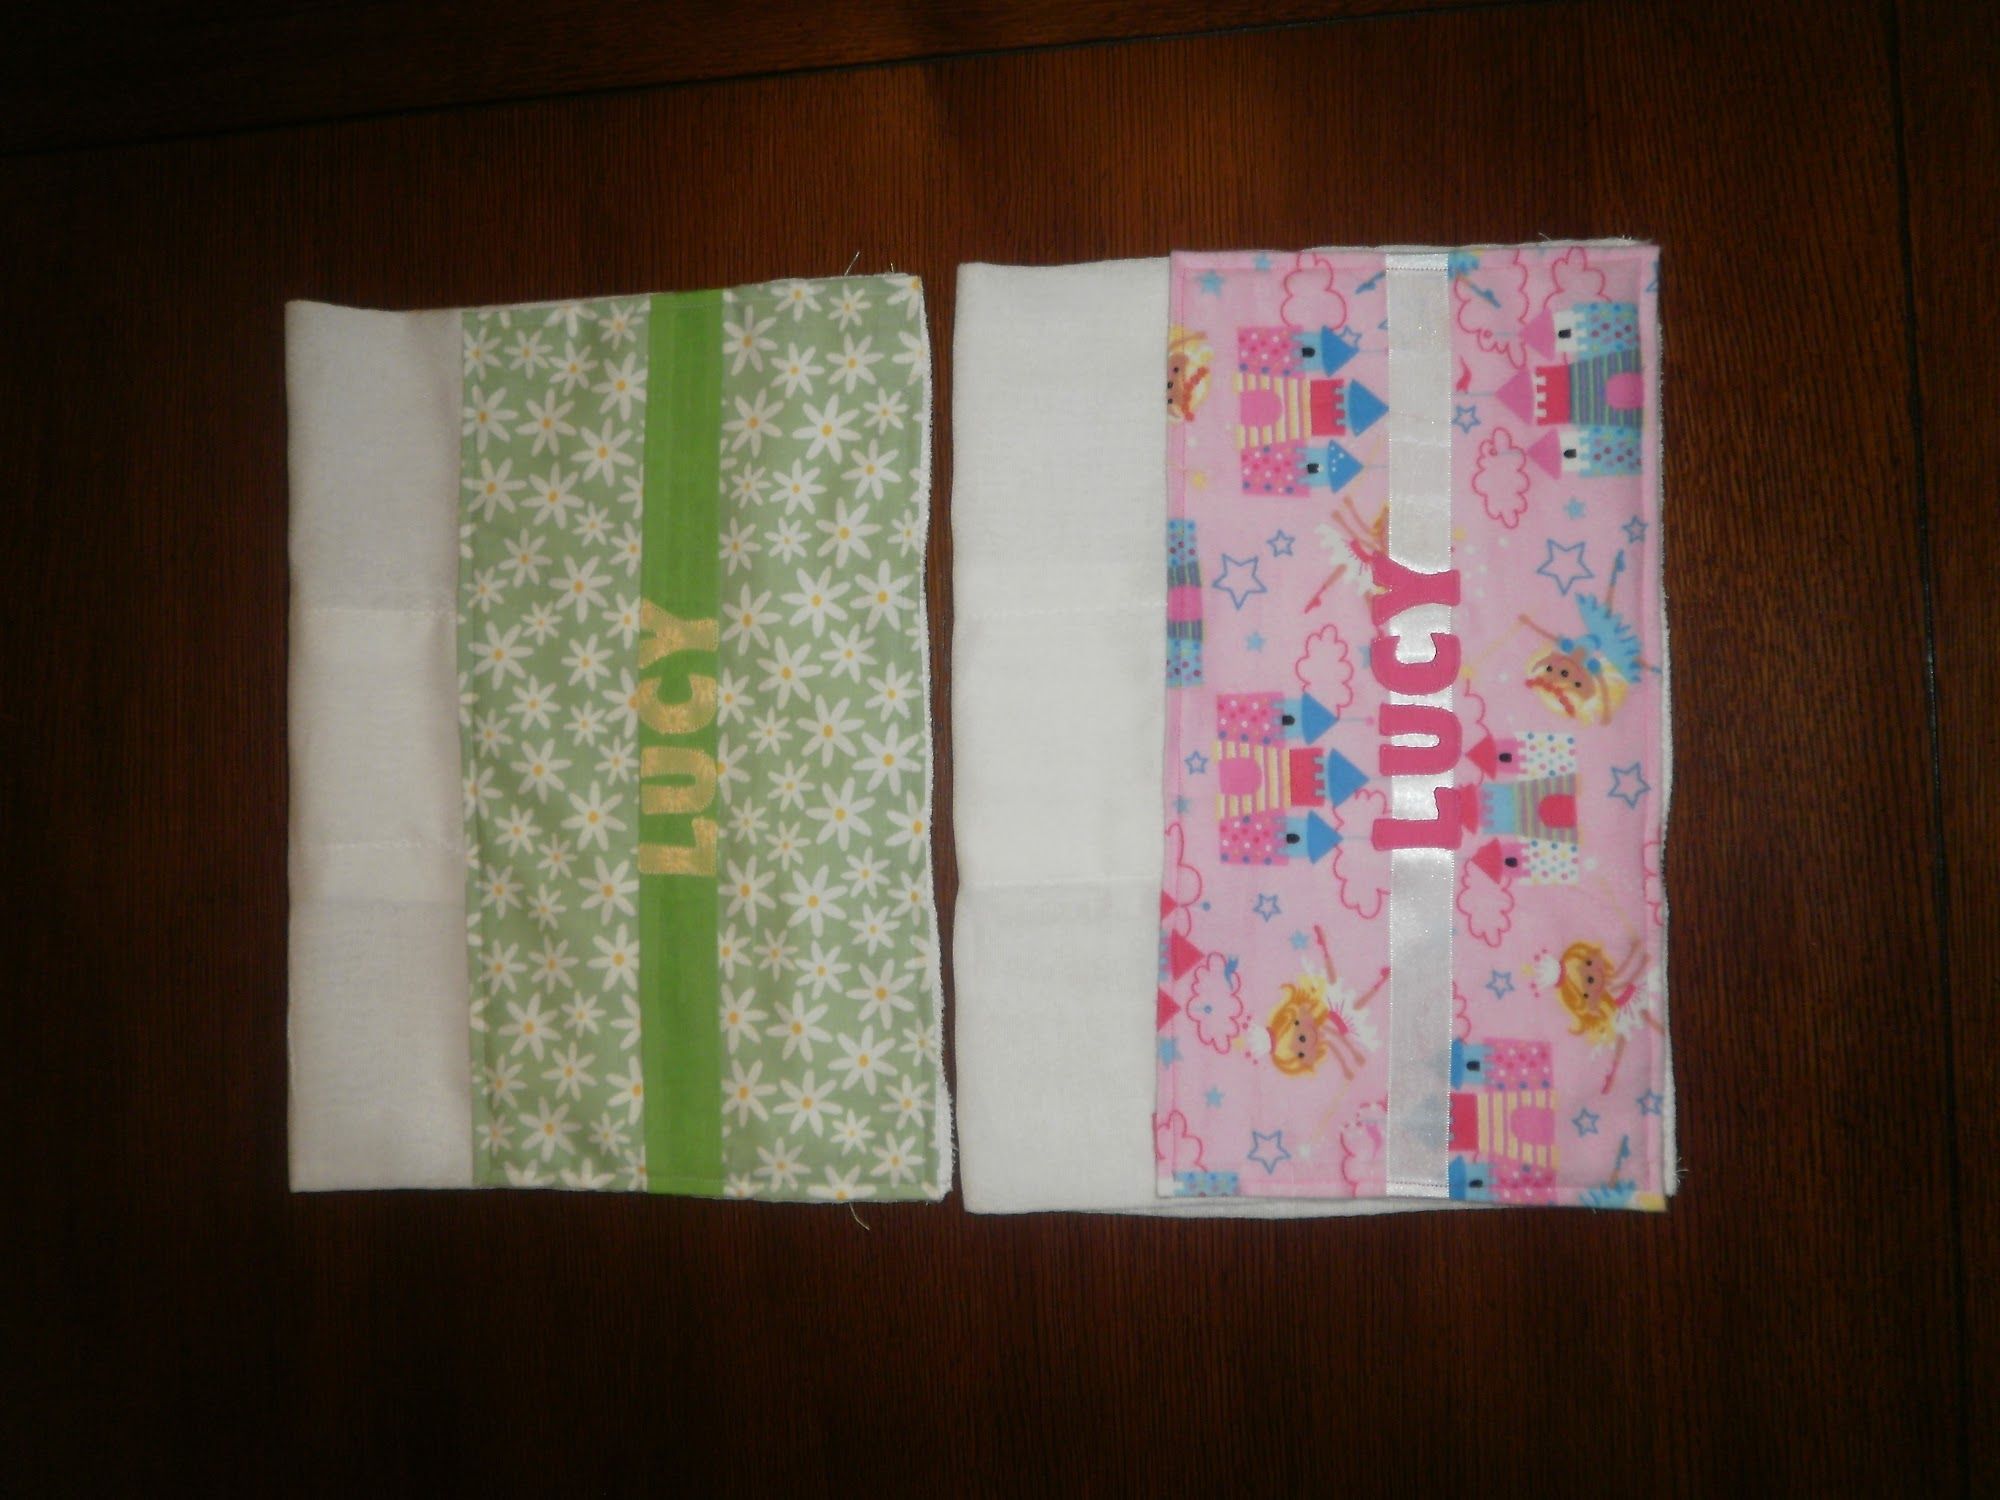  Personalized burp cloths I bought for a friend 